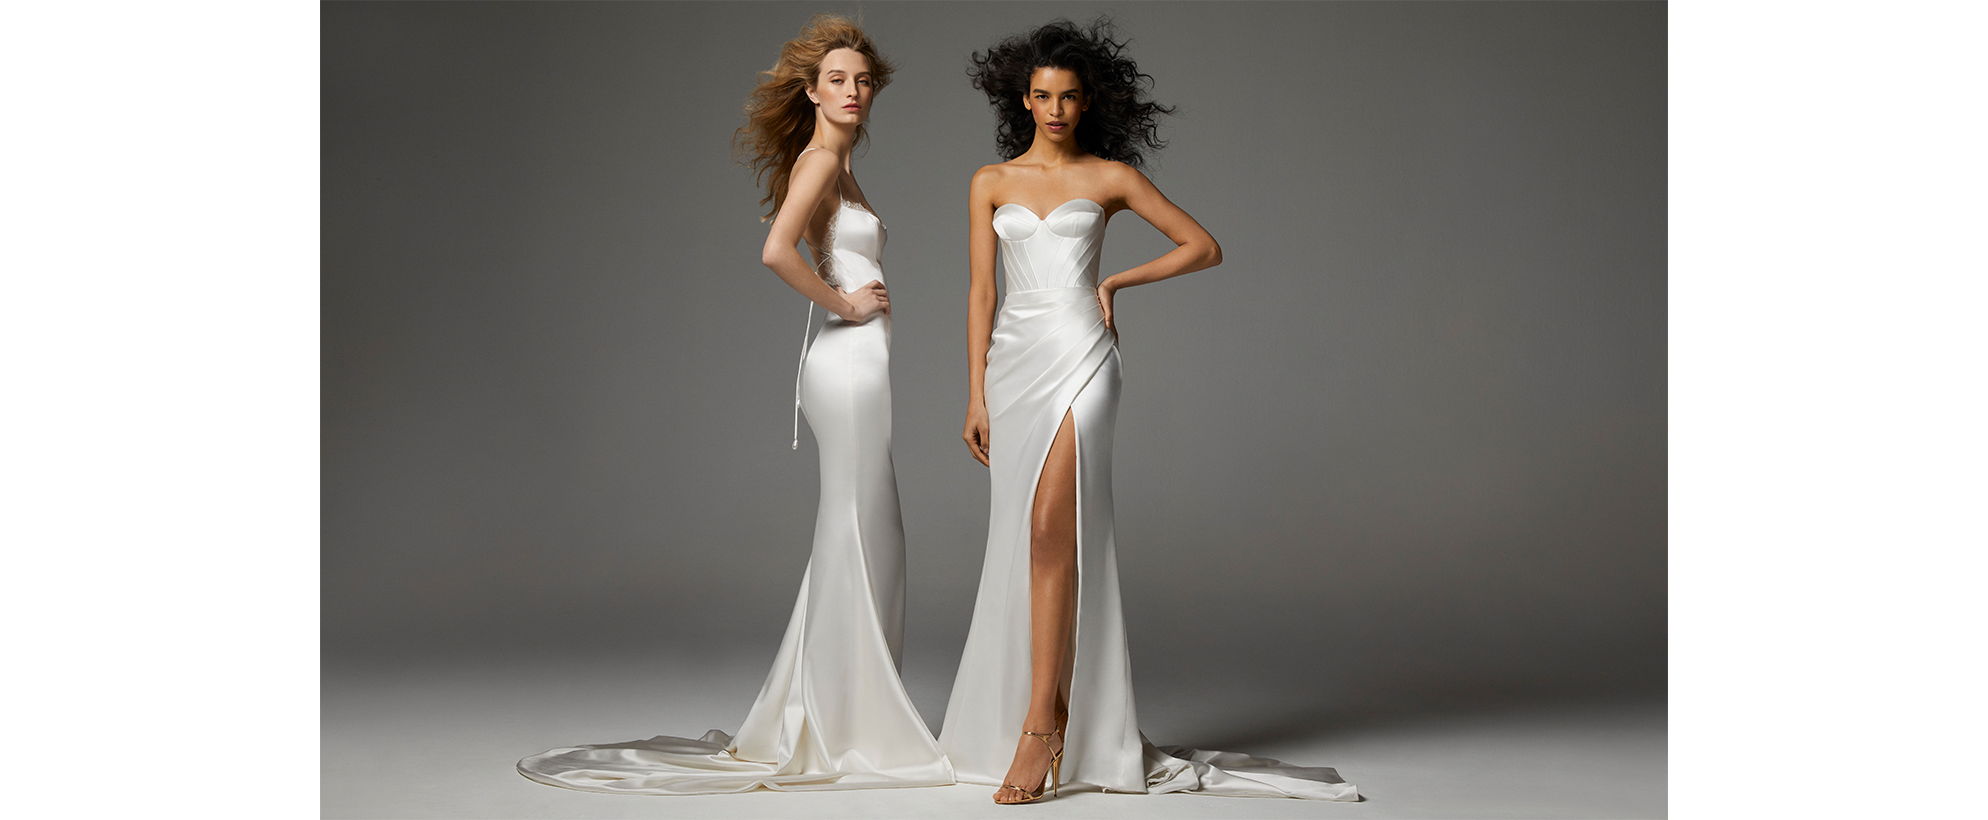 Strapless bridal dresses "Leone" and "Yamilla" of the Ines Di Santo Spring 2022 Bridal Couture Collection